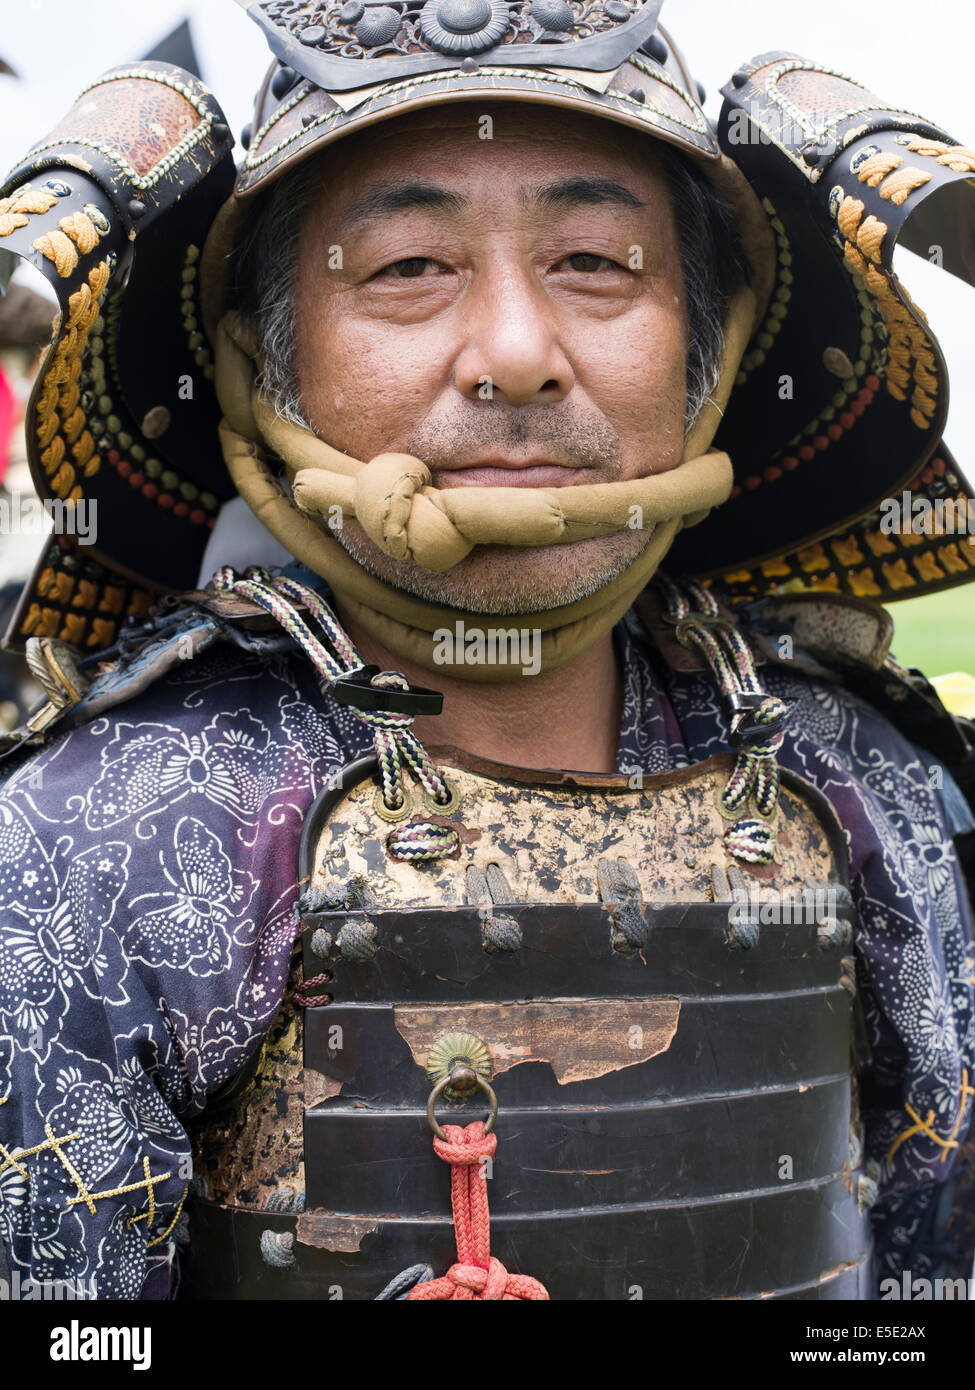 Soma Nomaoi A Traditional Japanese Samurai Horseman Festival Held In Minami Soma Fukushima Prefecture Japan The Area Is Still Recovering From The 11 Tohoku Earthquake And Tsunami Credit Chris Willson Alamy Live News